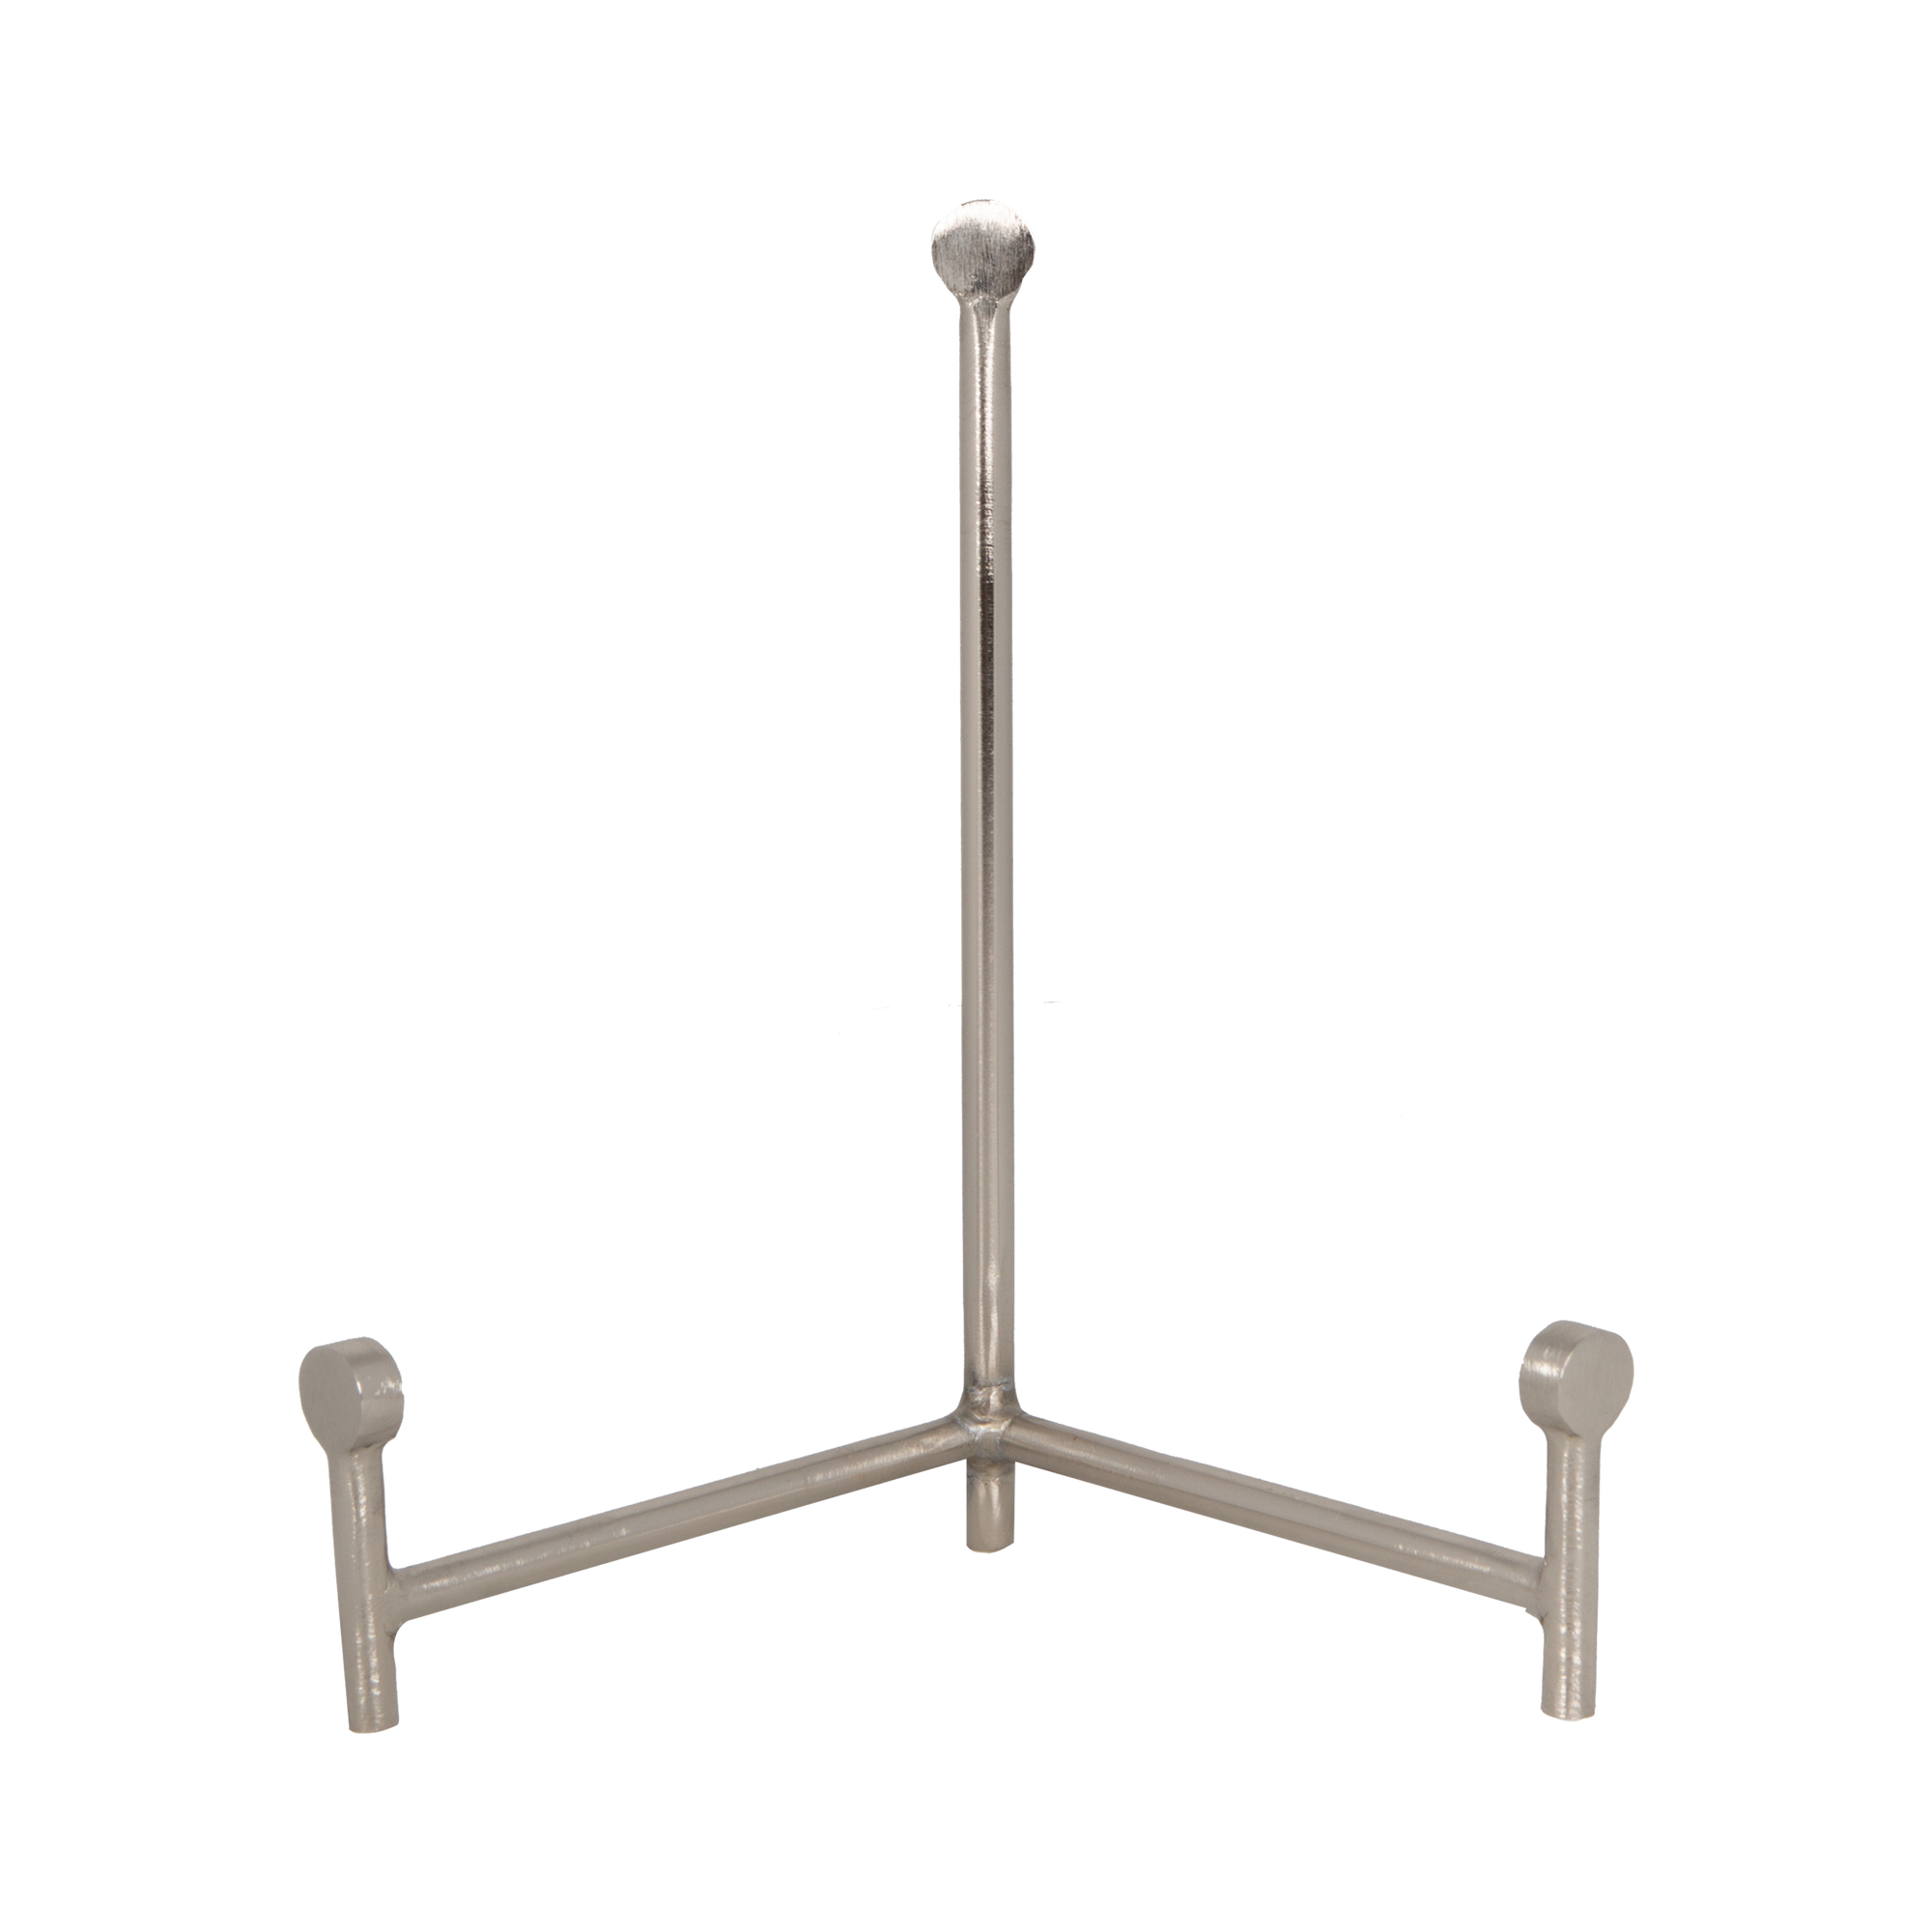 With its sturdy design, this black tripod stand is a great piece to showcase your unique plates and decorative trays.